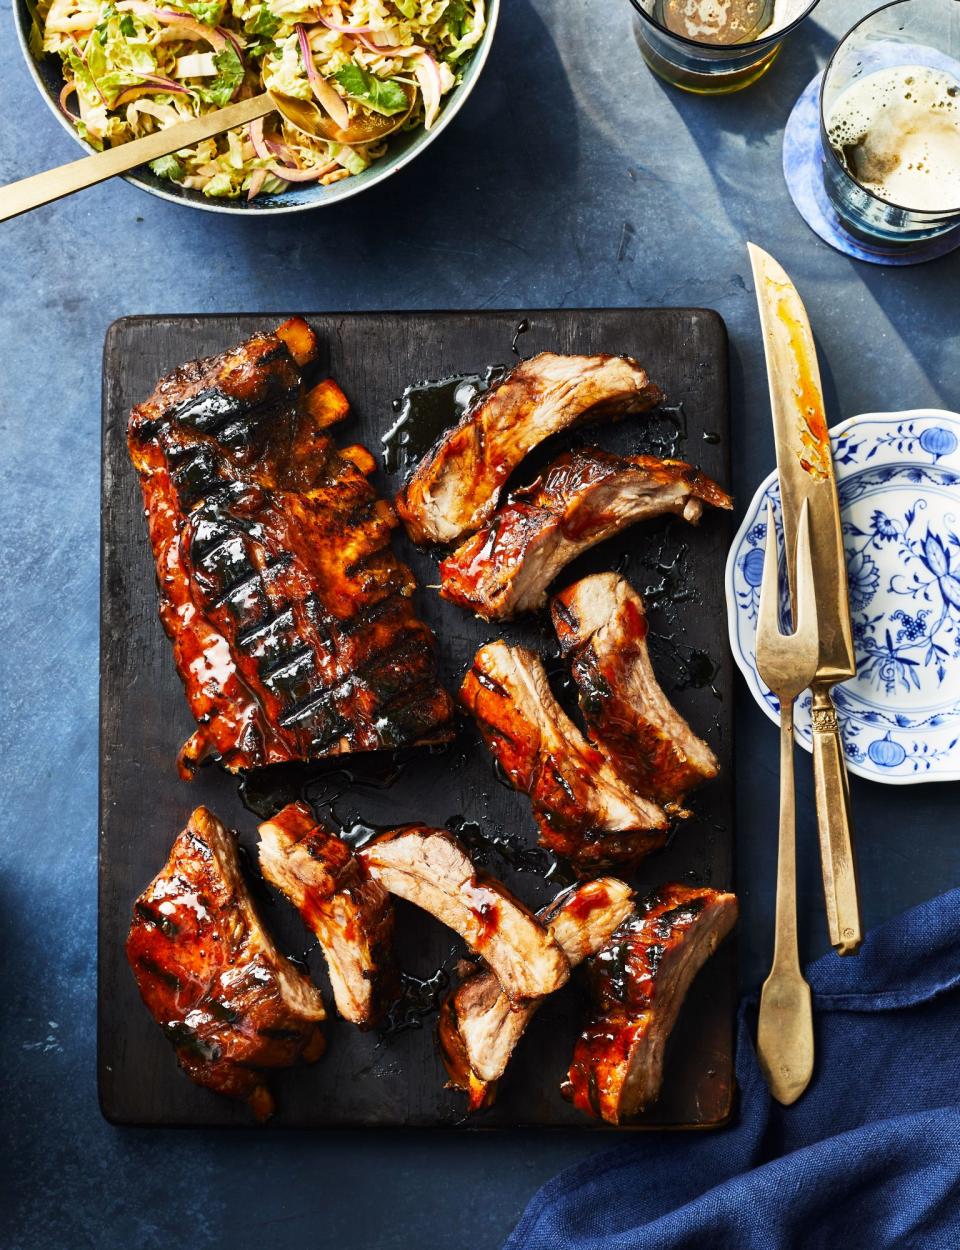 Sticky-Sweet Korean Barbecue Ribs